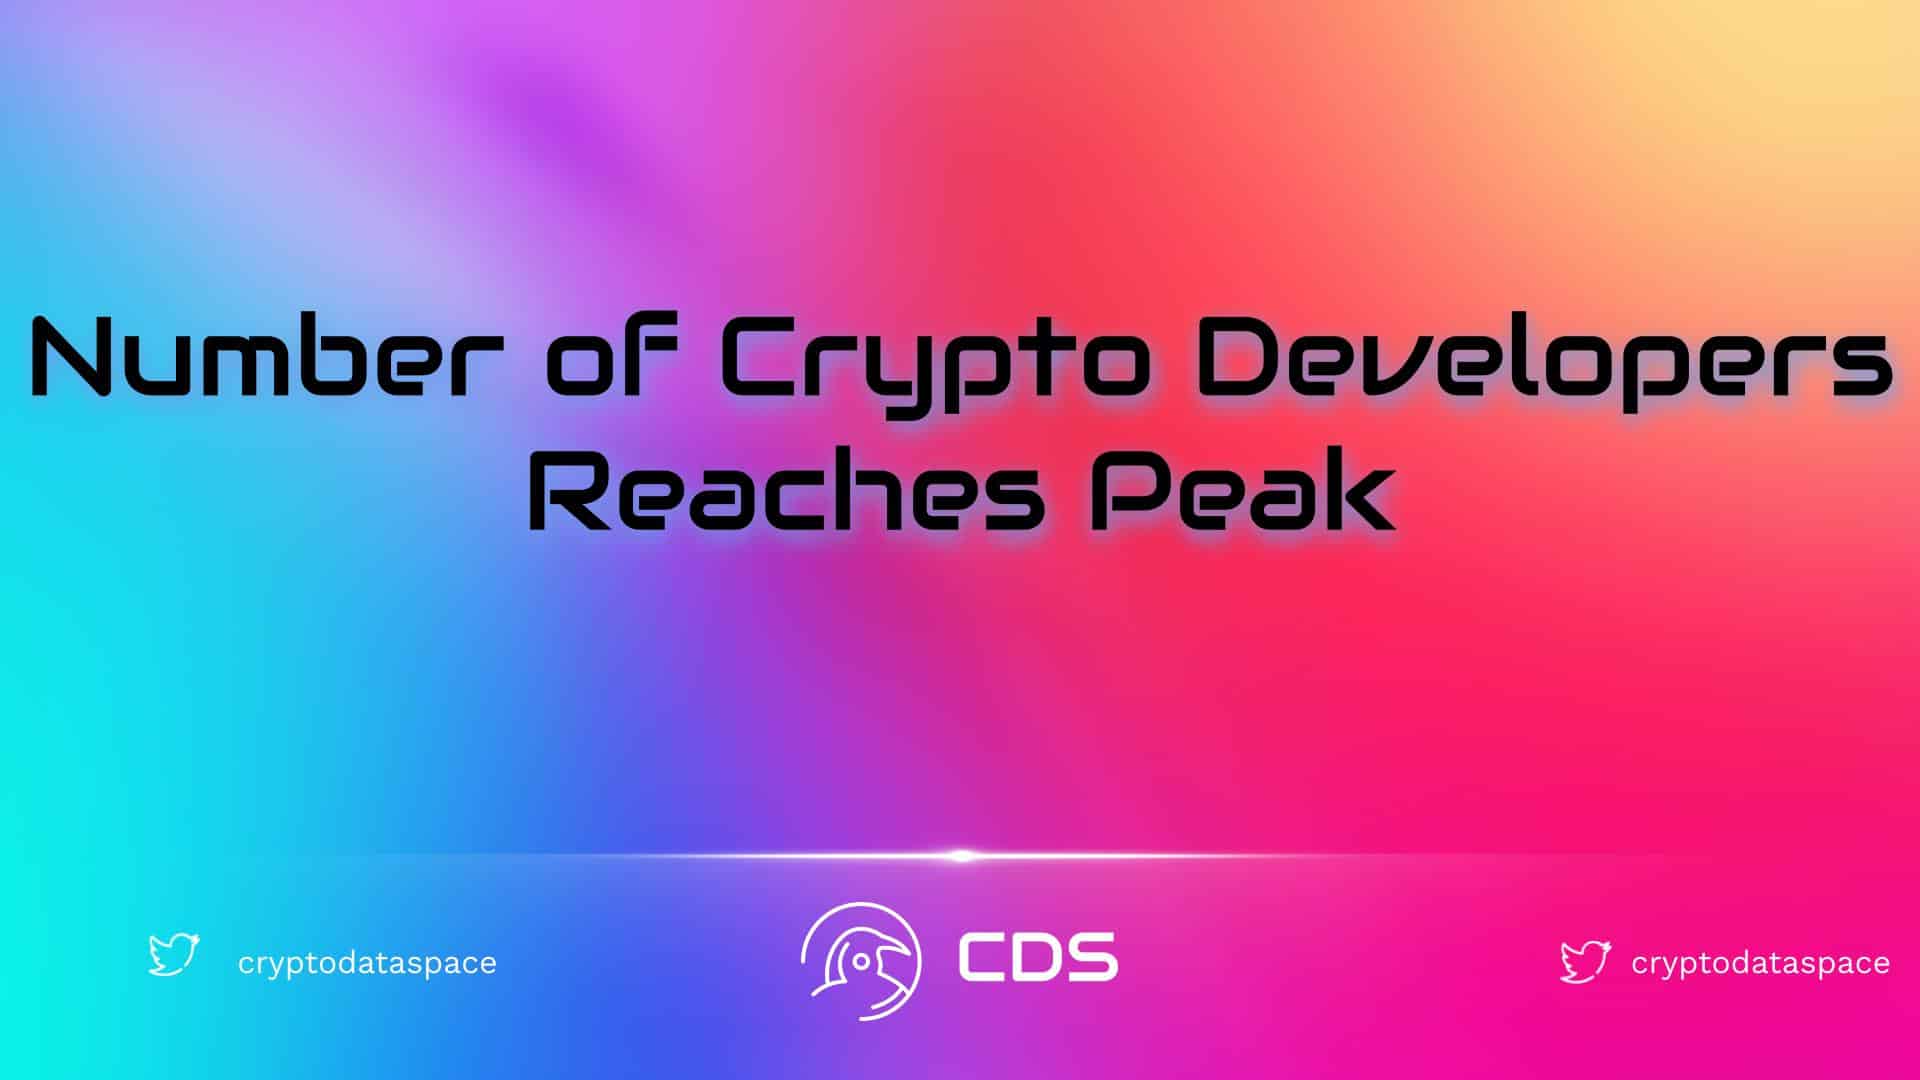 Number of Crypto Developers Reaches Peak